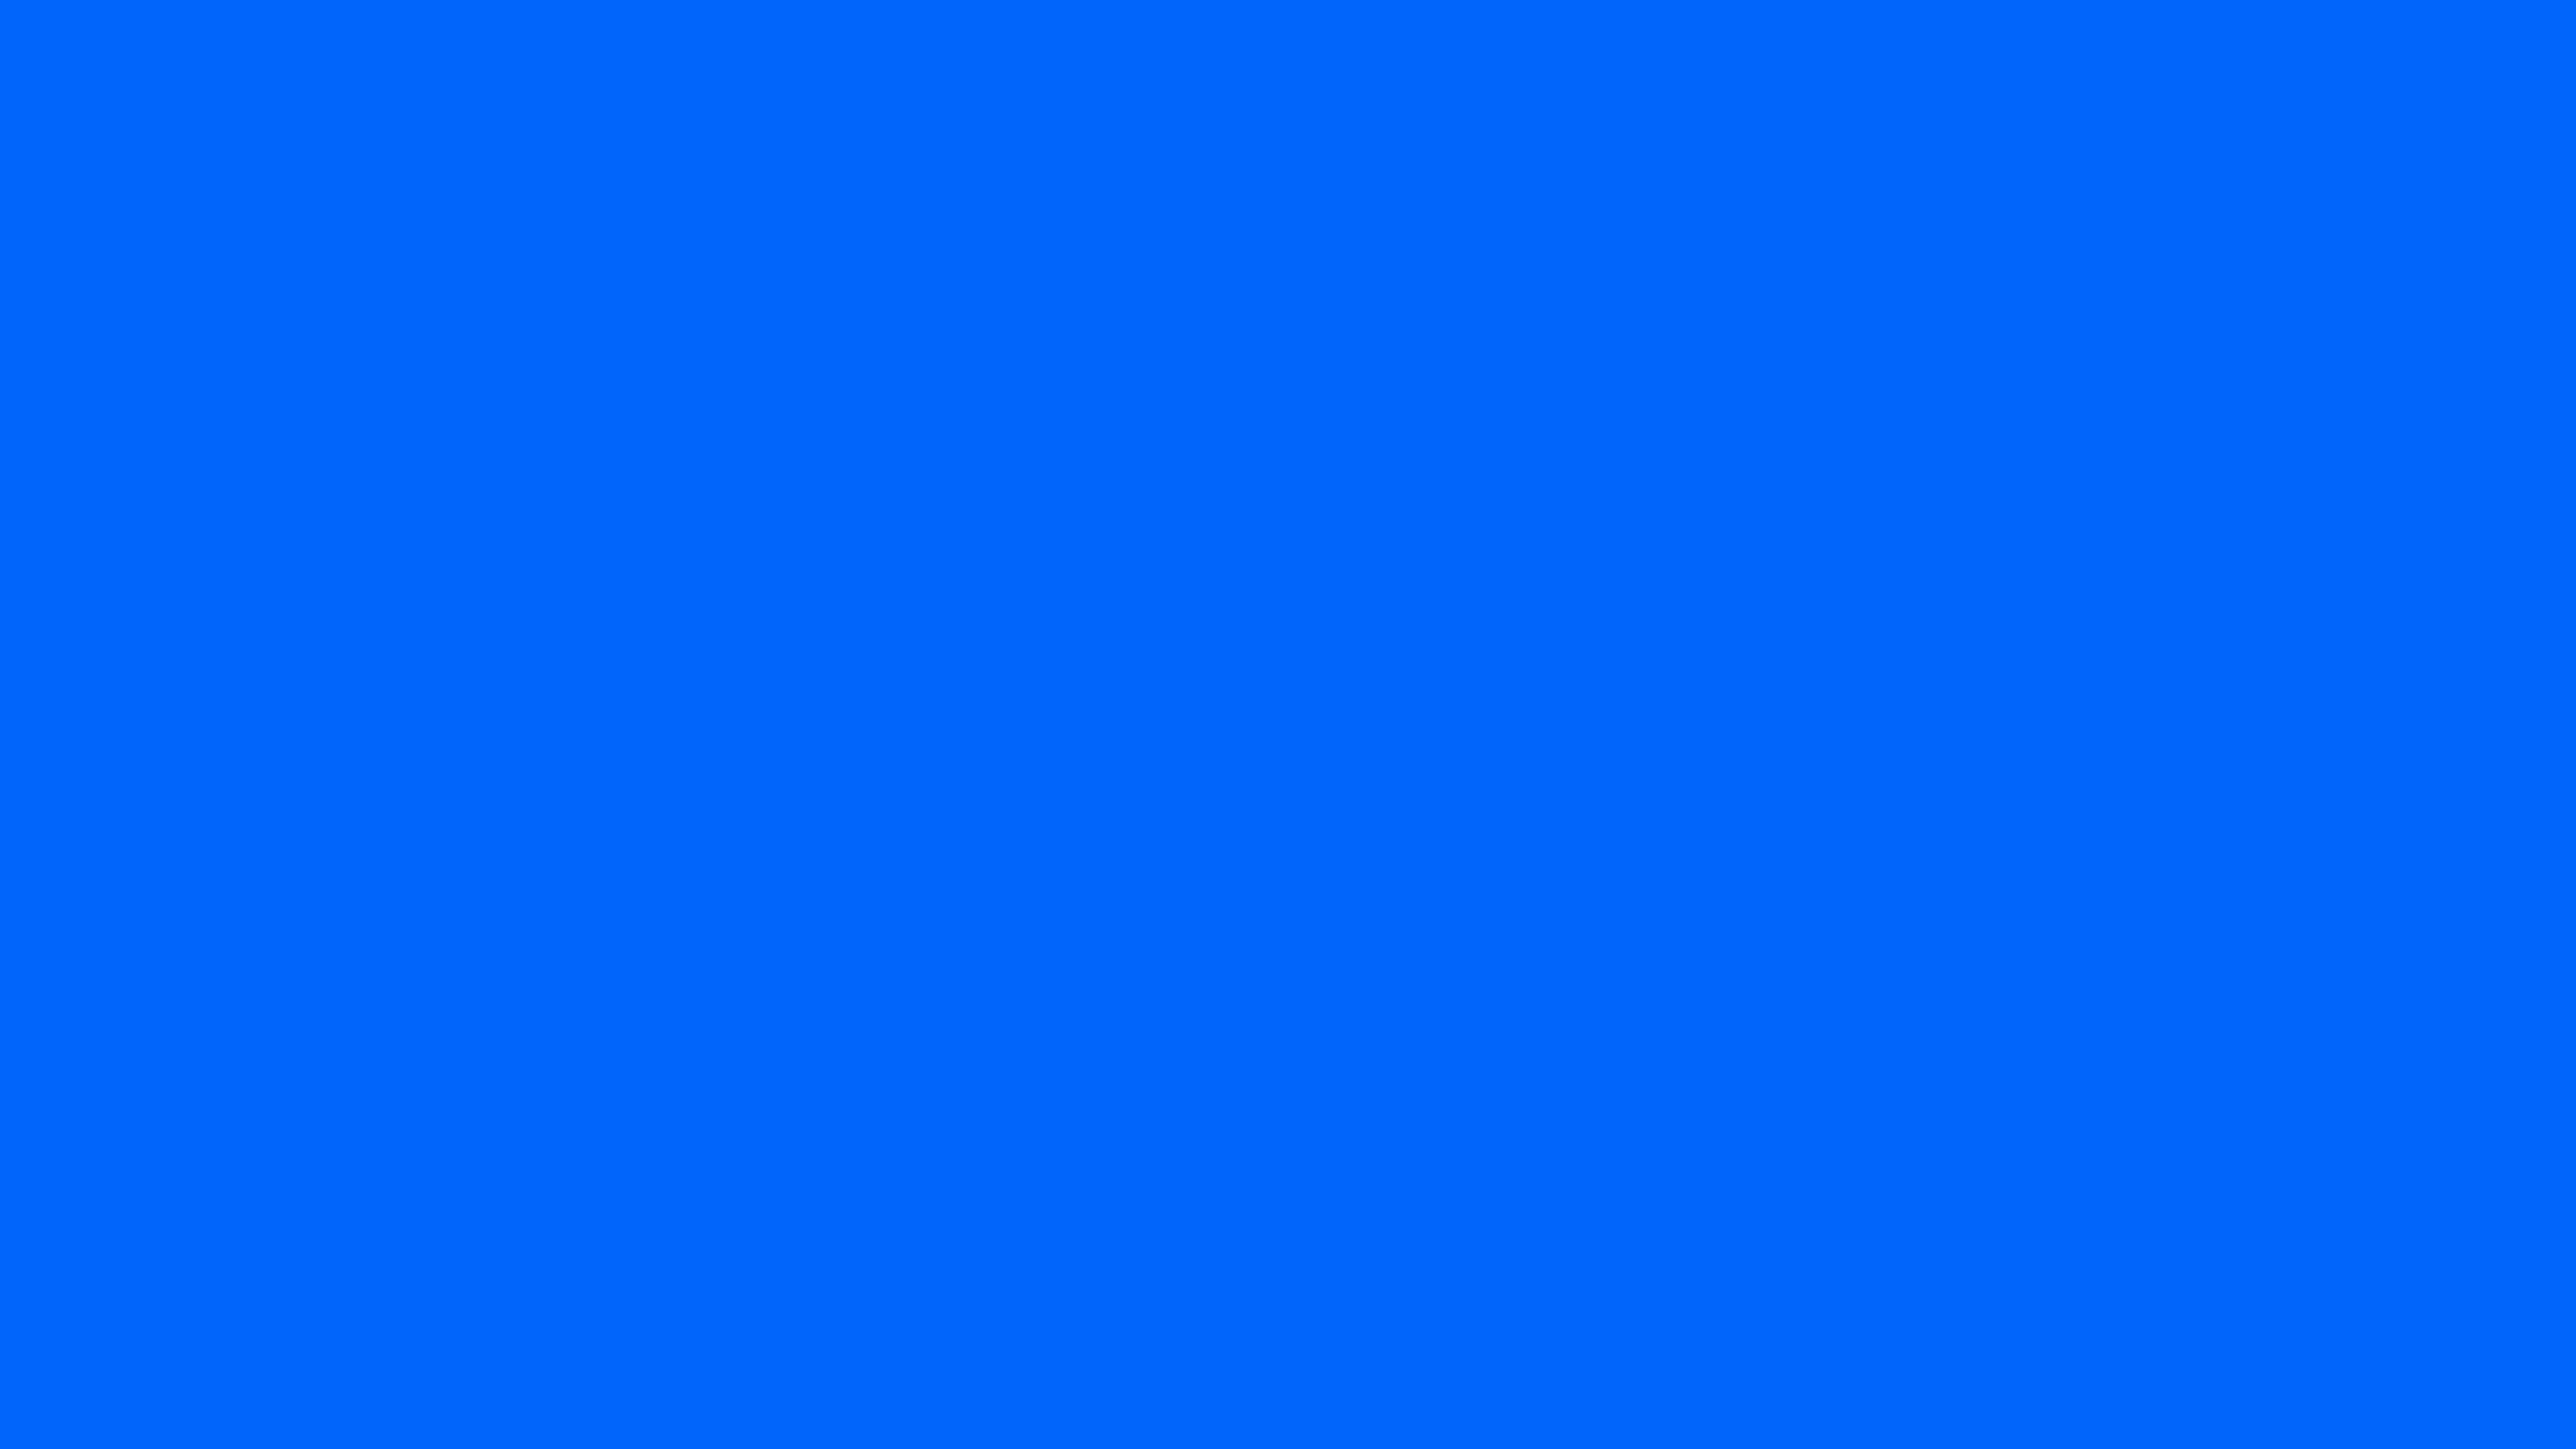 Bright Blue Solid Color Background Image | Free Image Generator